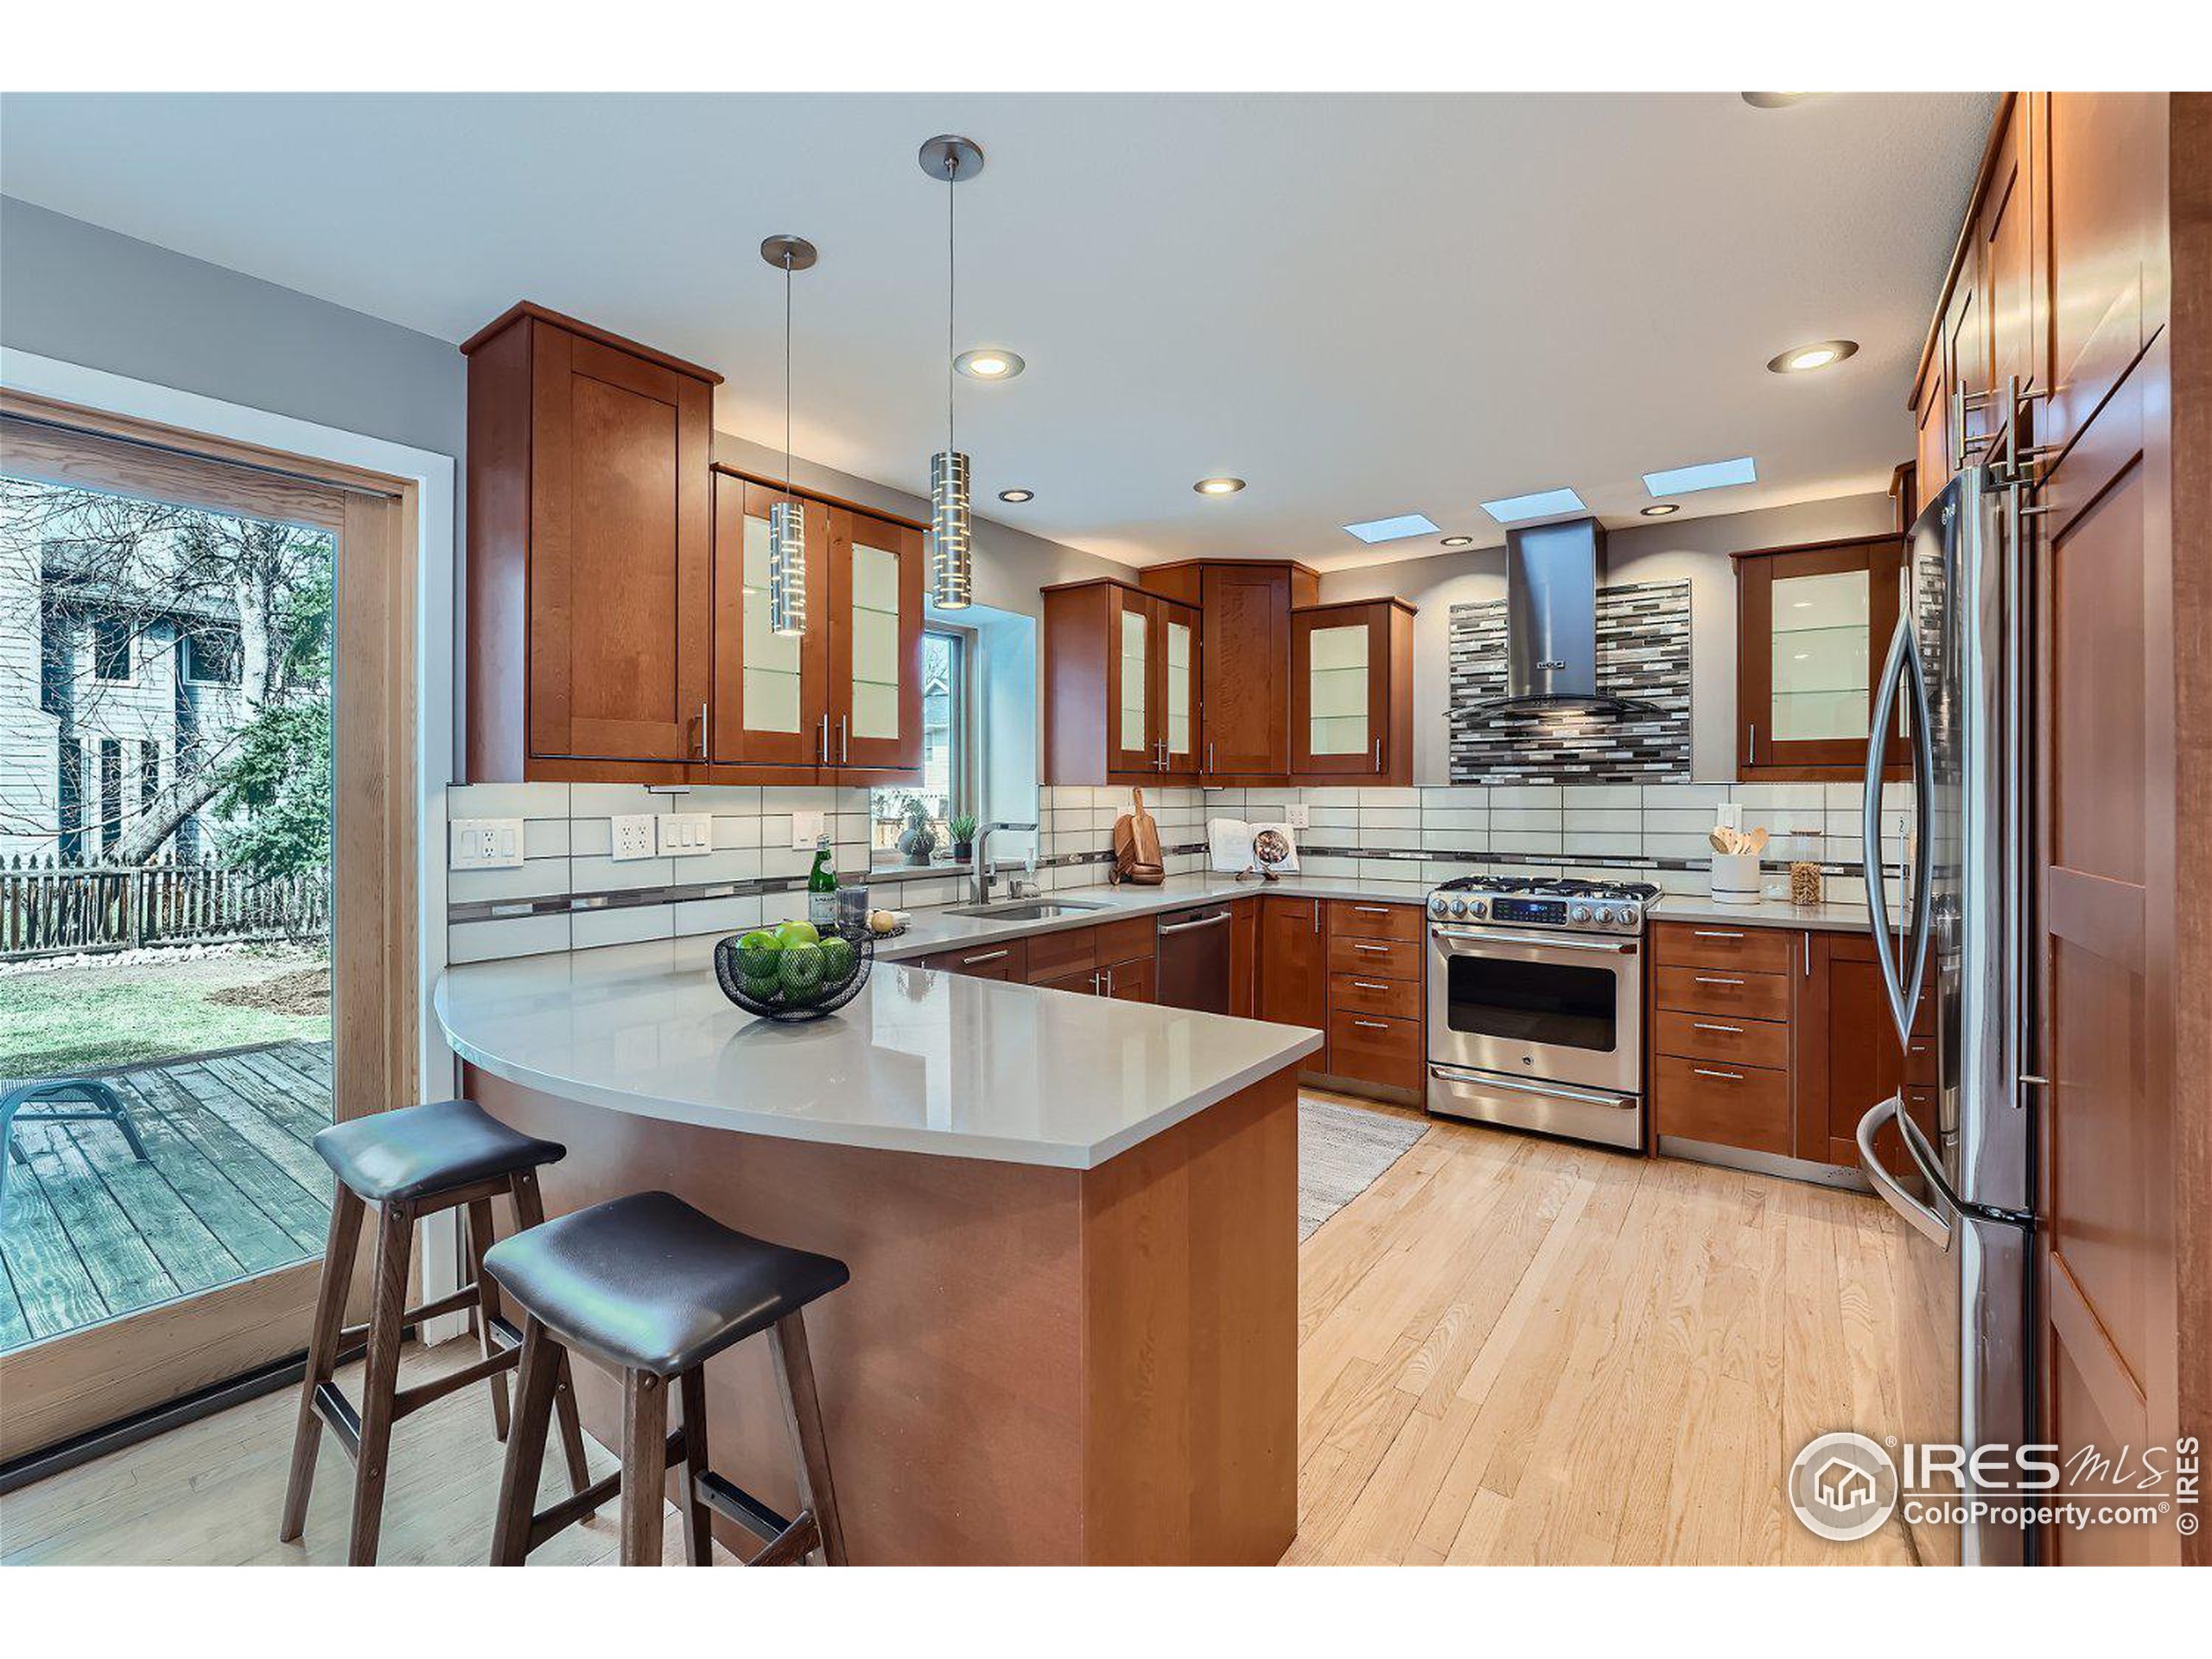 a kitchen with kitchen island granite countertop wooden floors and a refrigerator